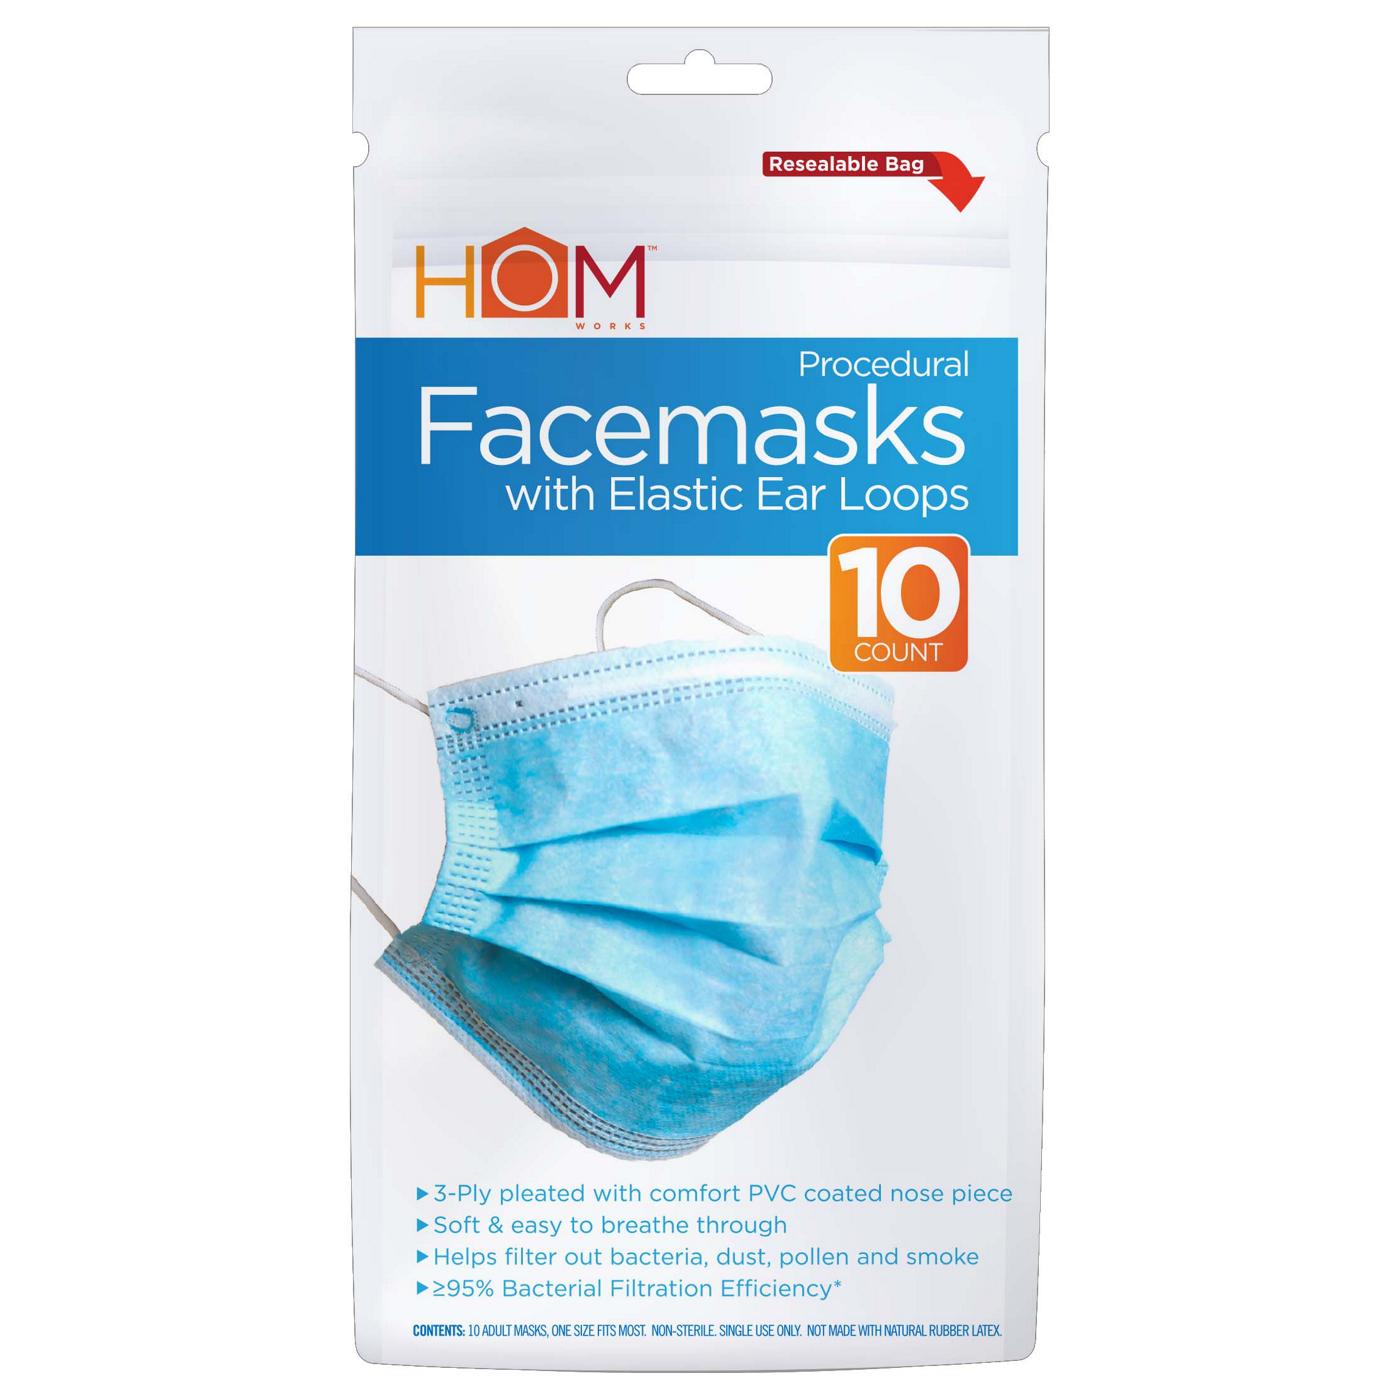 Hom Works Facemasks with Elastic Ear Loops; image 2 of 2